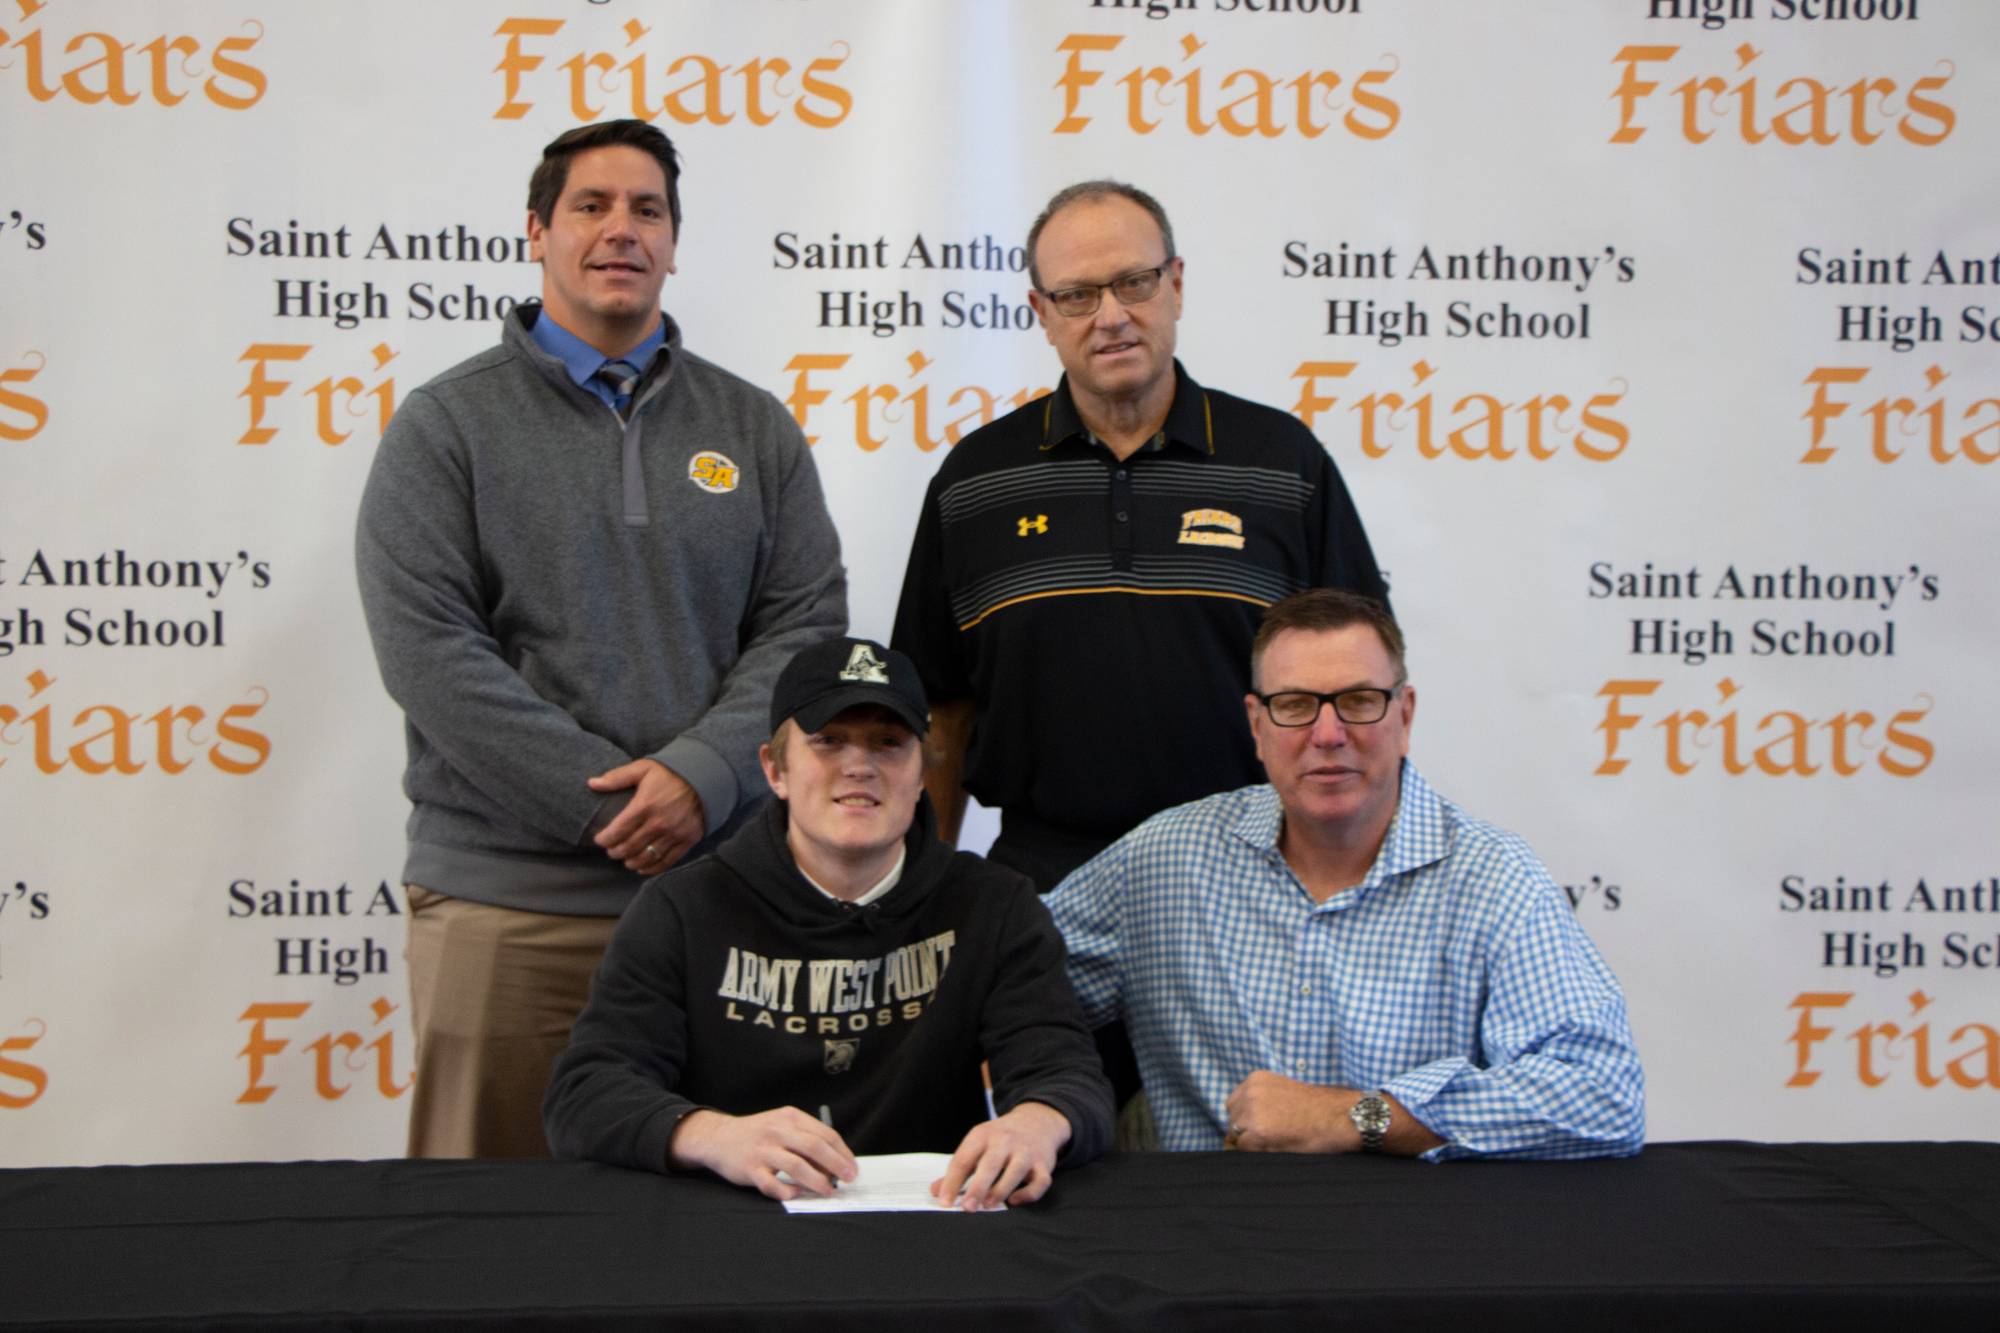 Colin Langton commits to West Point 